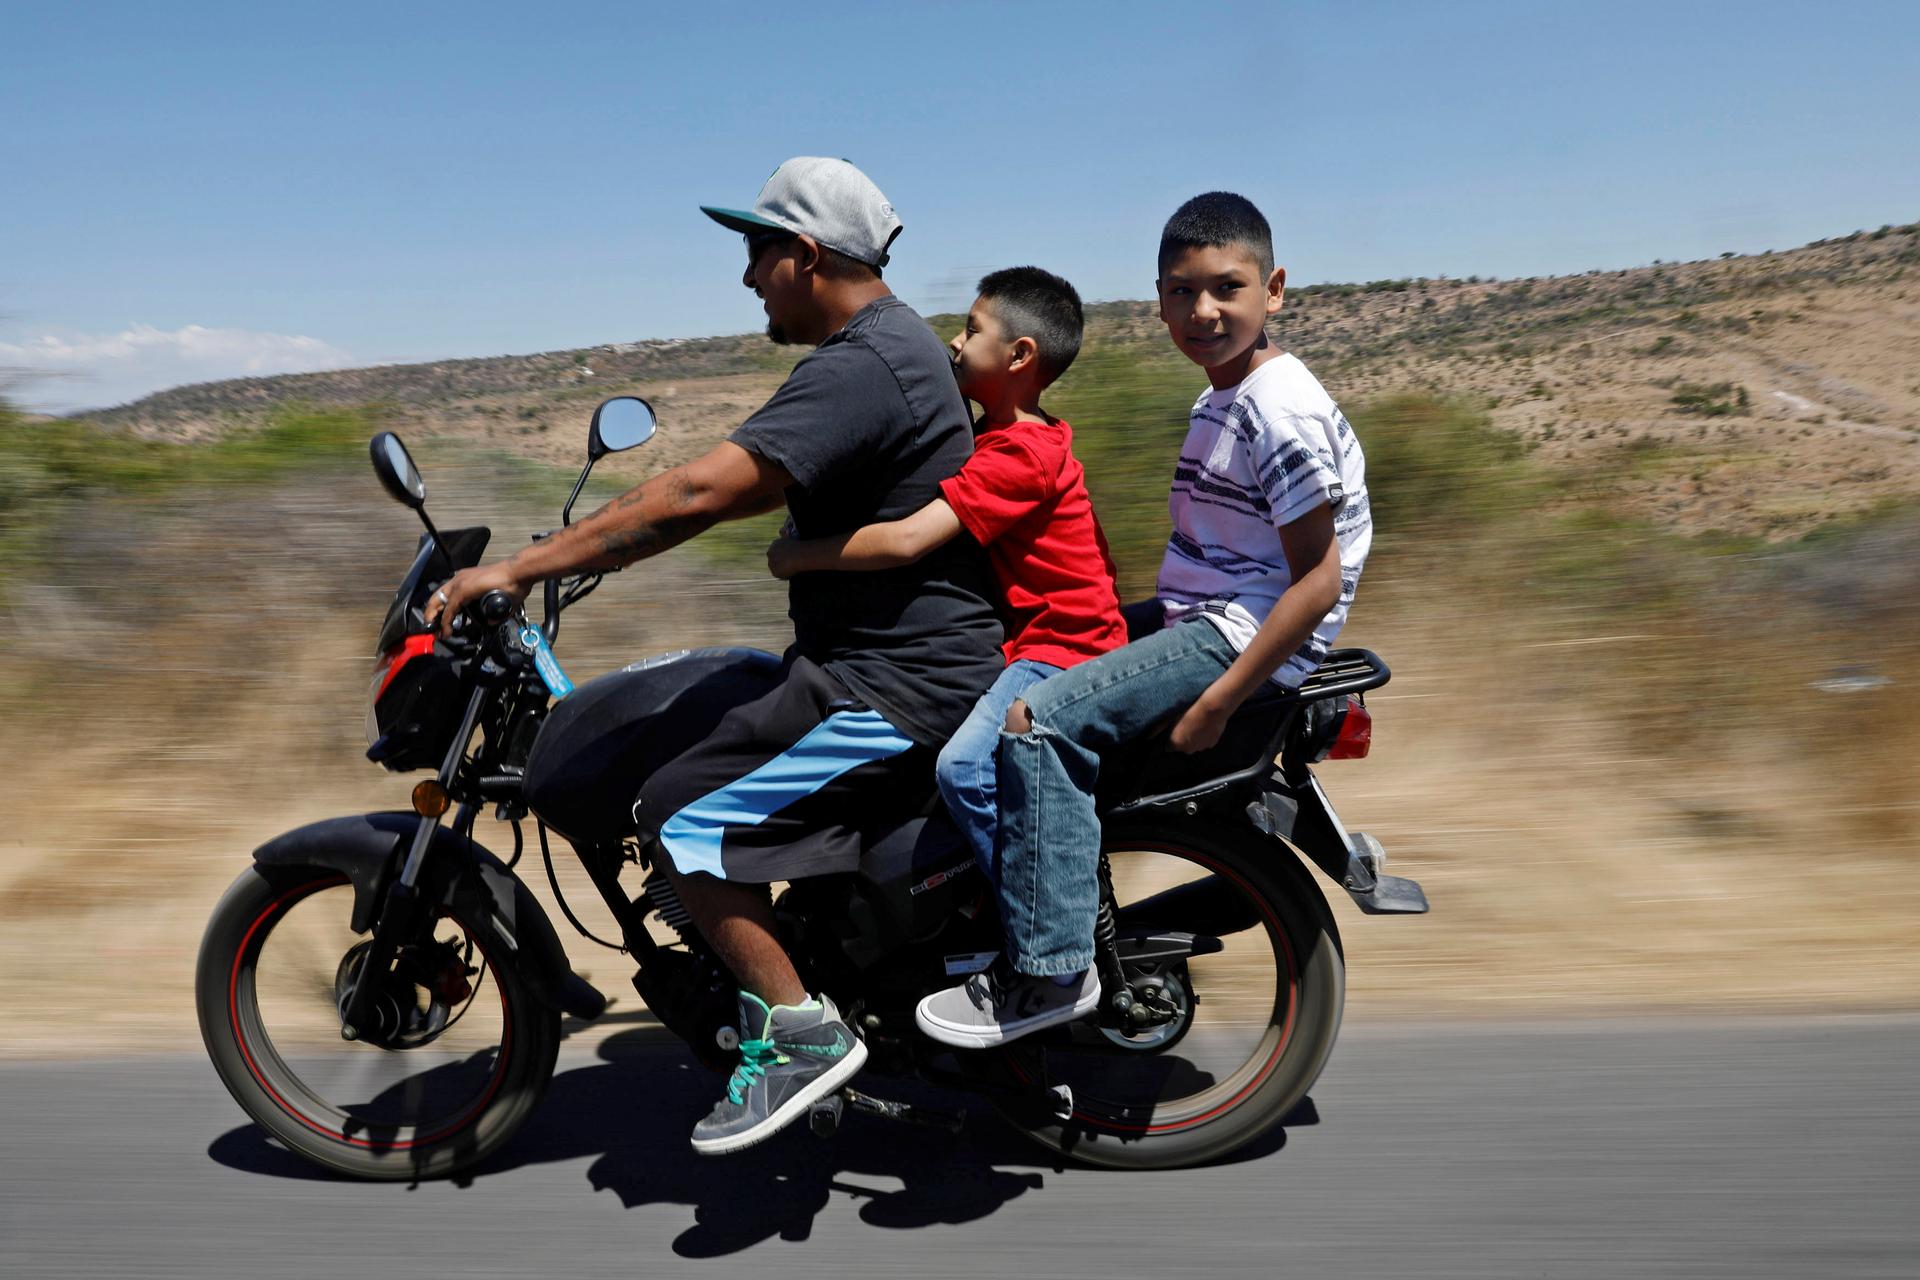 A man and two boys ride a motorcycle